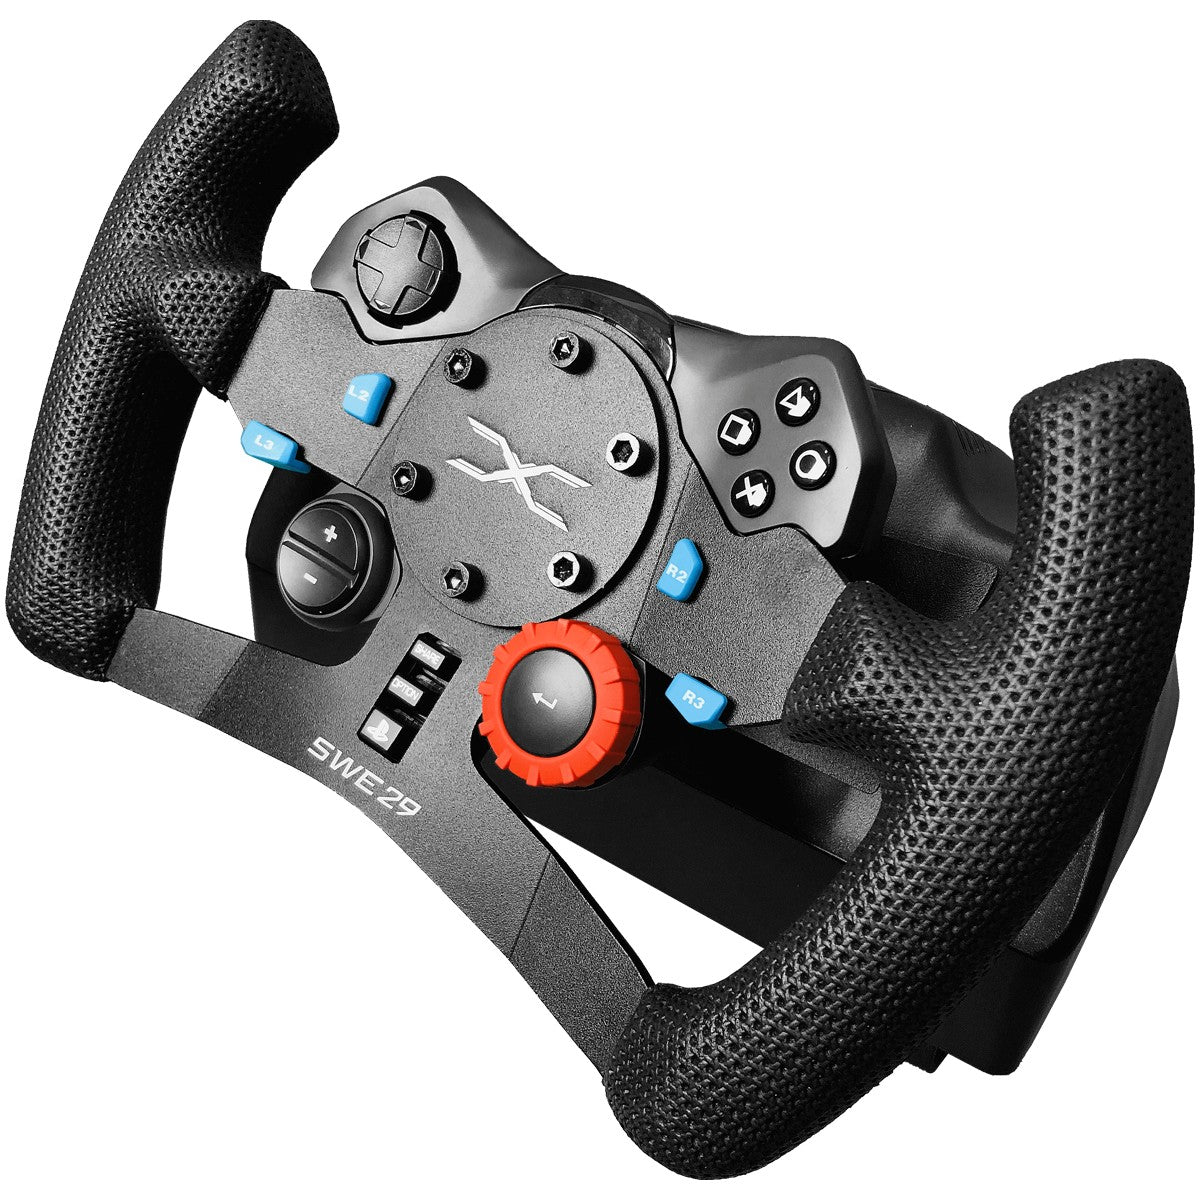 ON 29 FOR LOGITECH (For G29) - Extreme Simracing